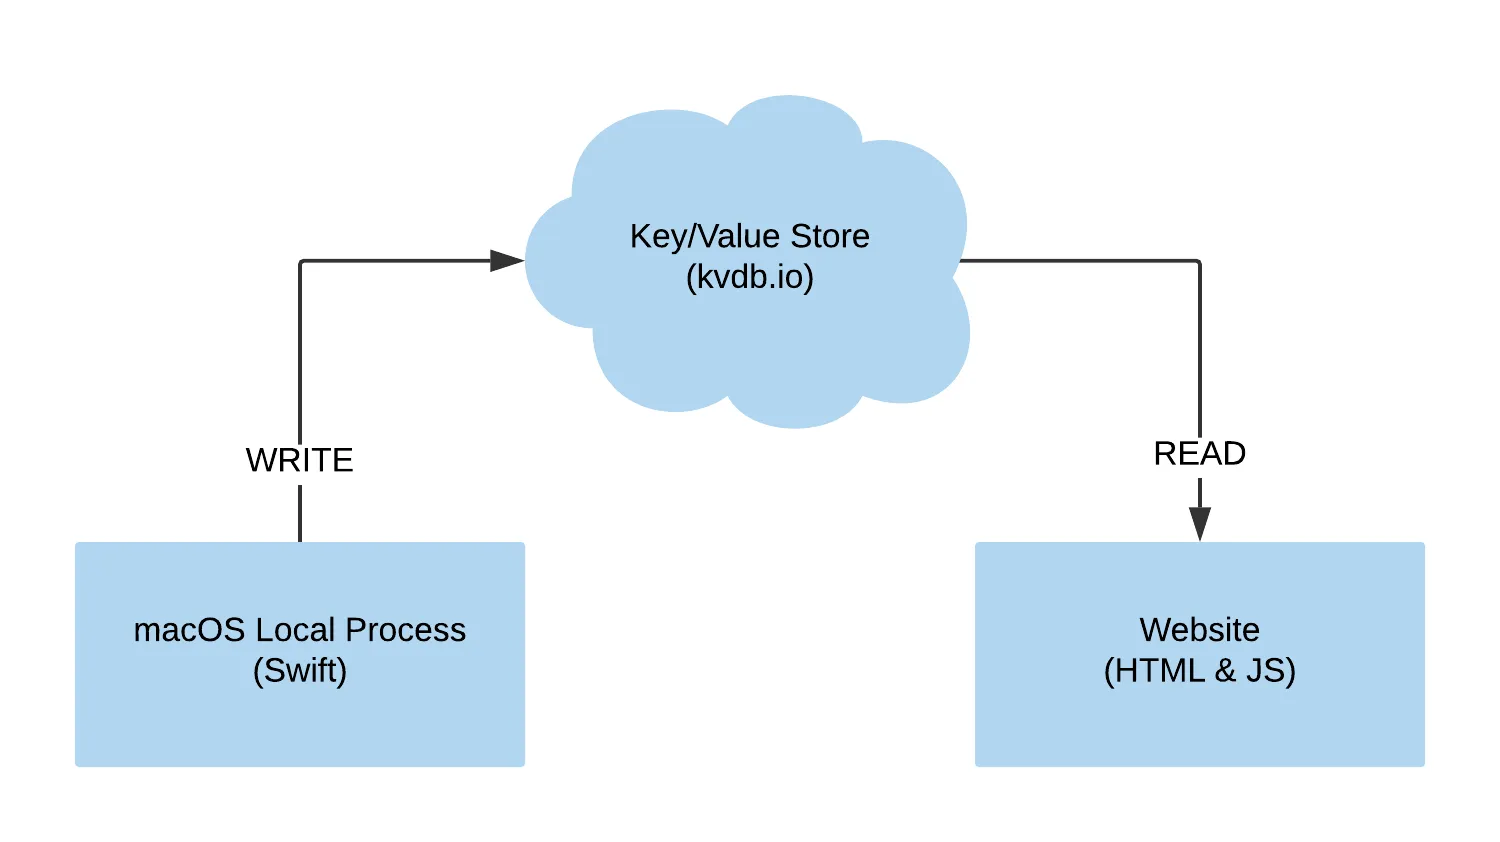 Flow diagram showing a local process using Swift writing to the KVdb cloud key/value store that is read from an HTML &#x26; JS website